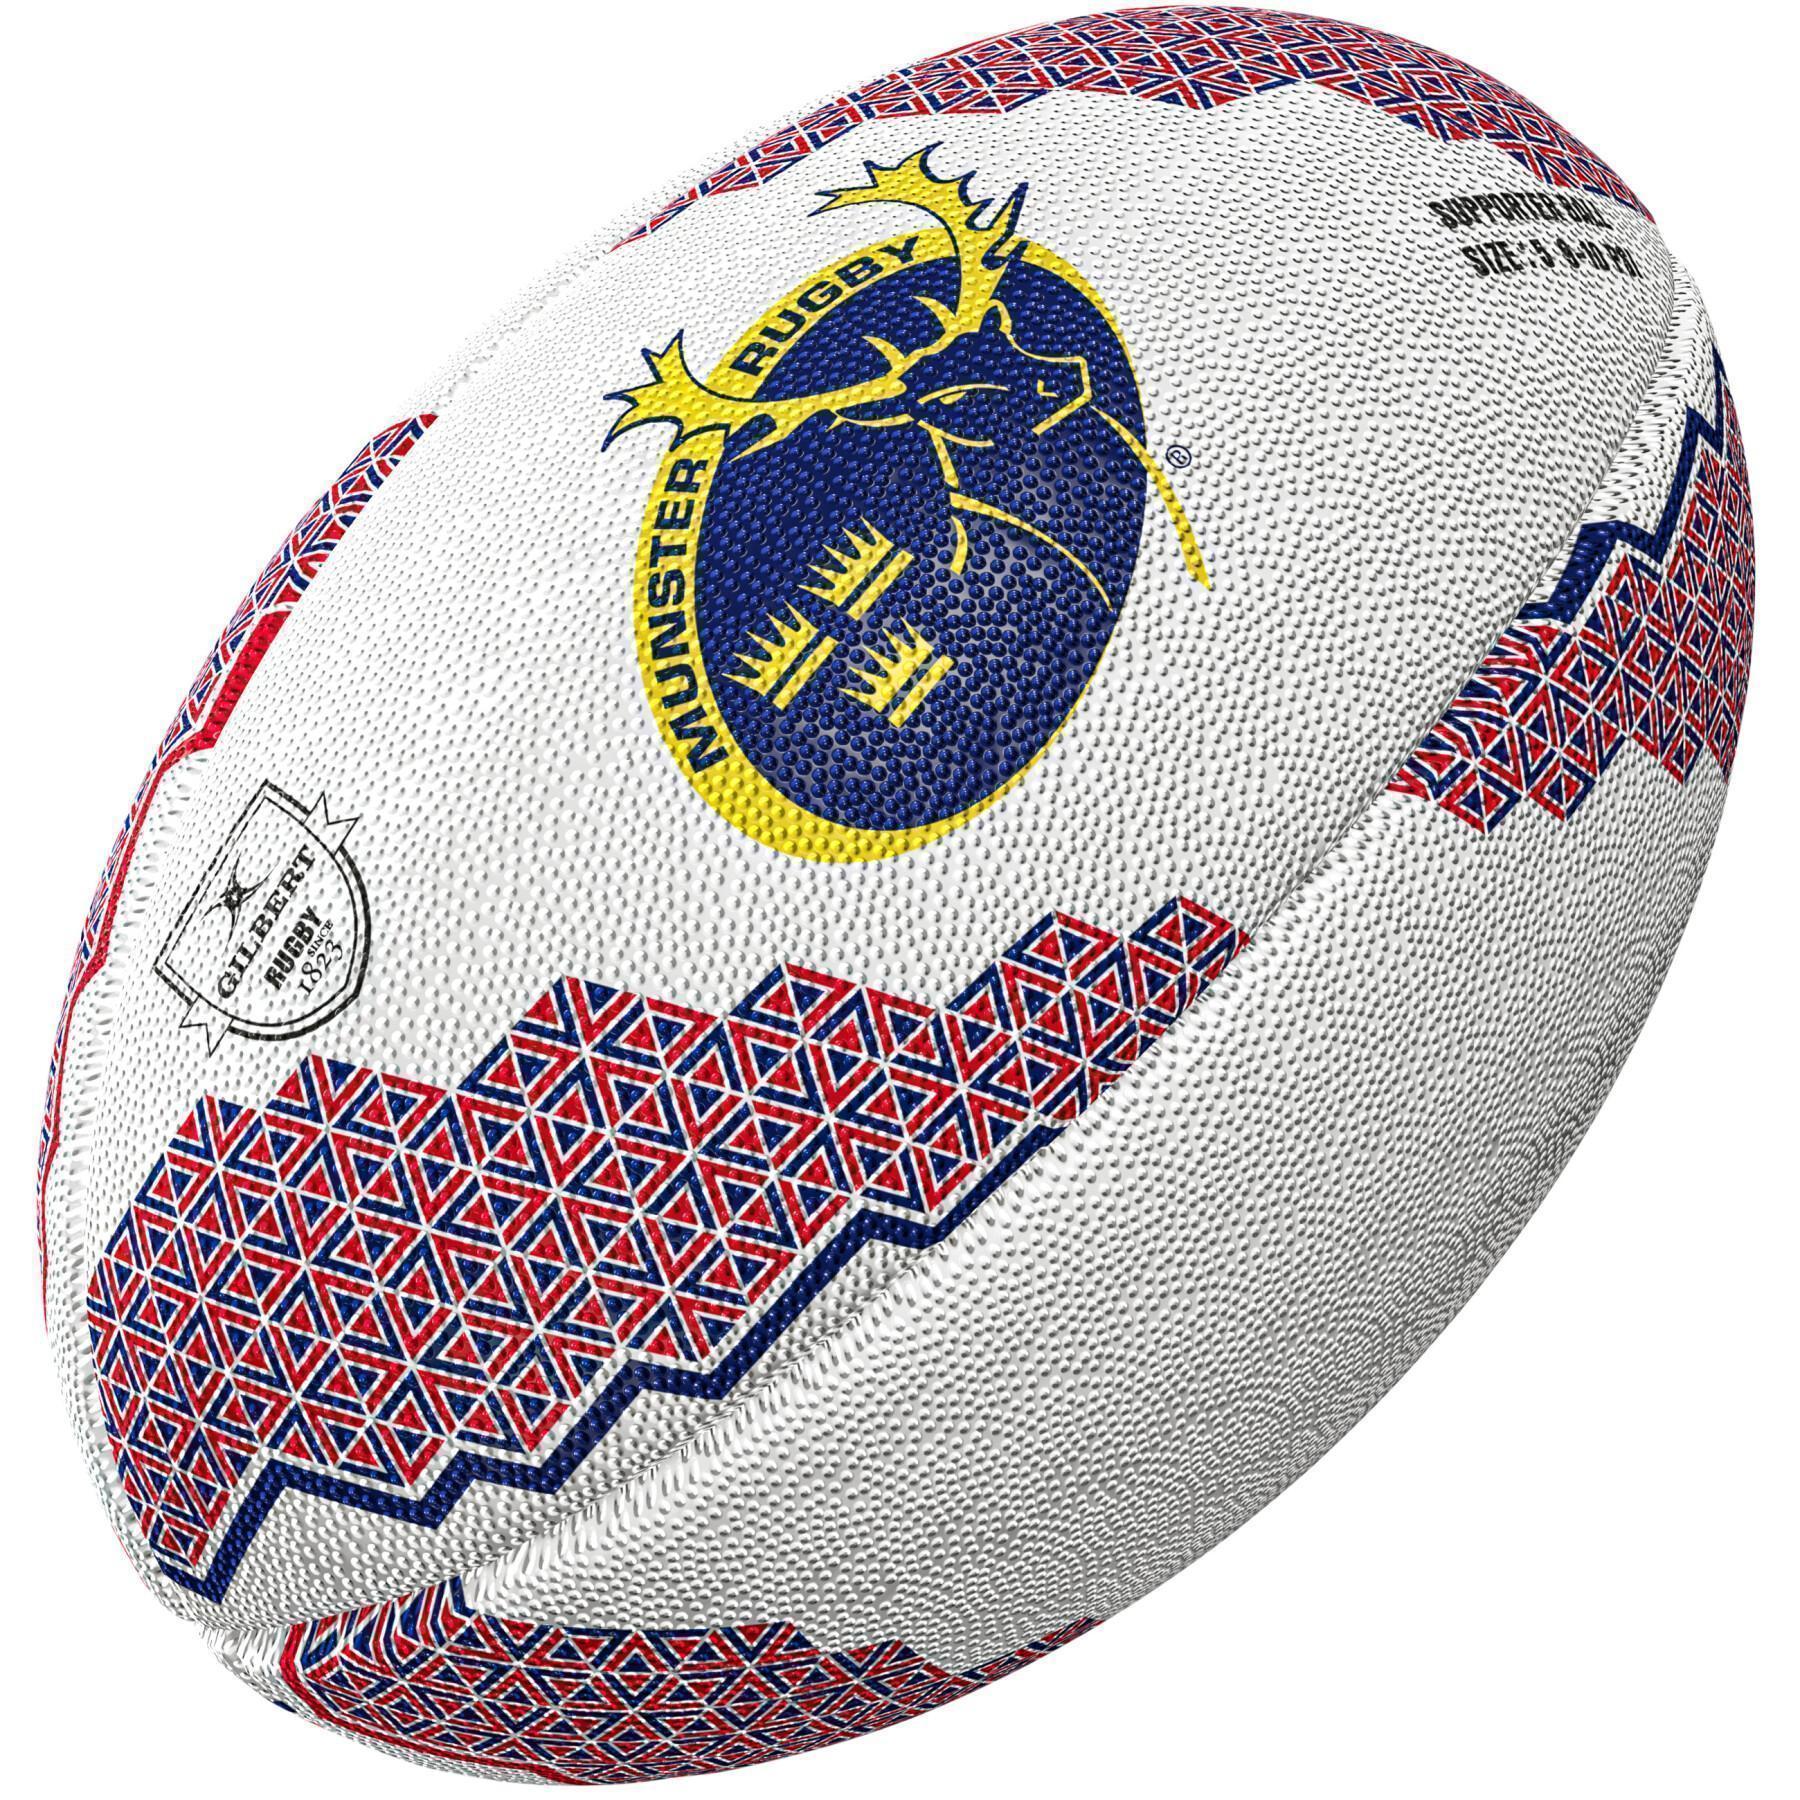 Pallone da rugby Munster Supporter